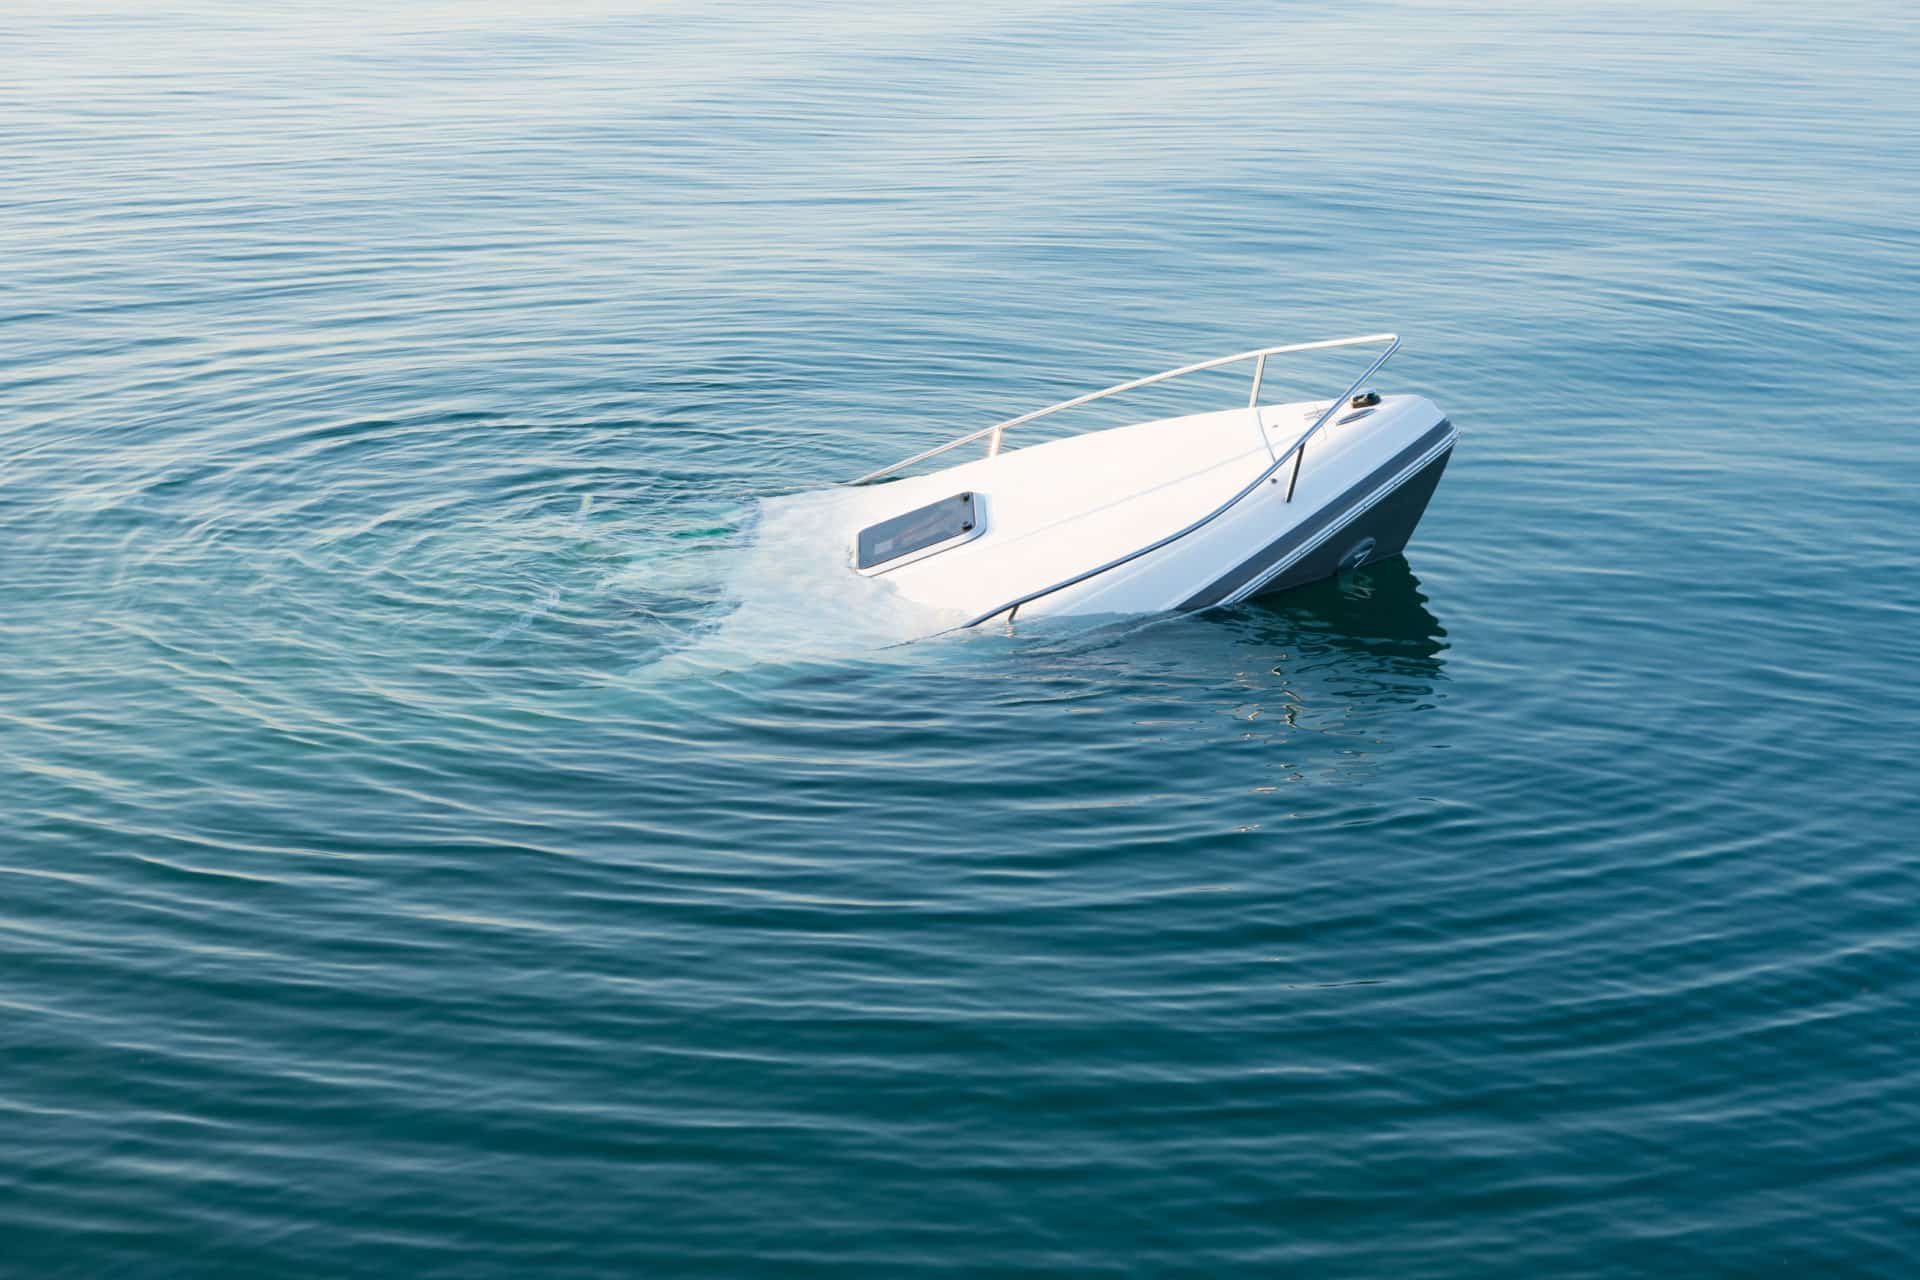 New Yorkers: Stay Safe While Boating This Summer!